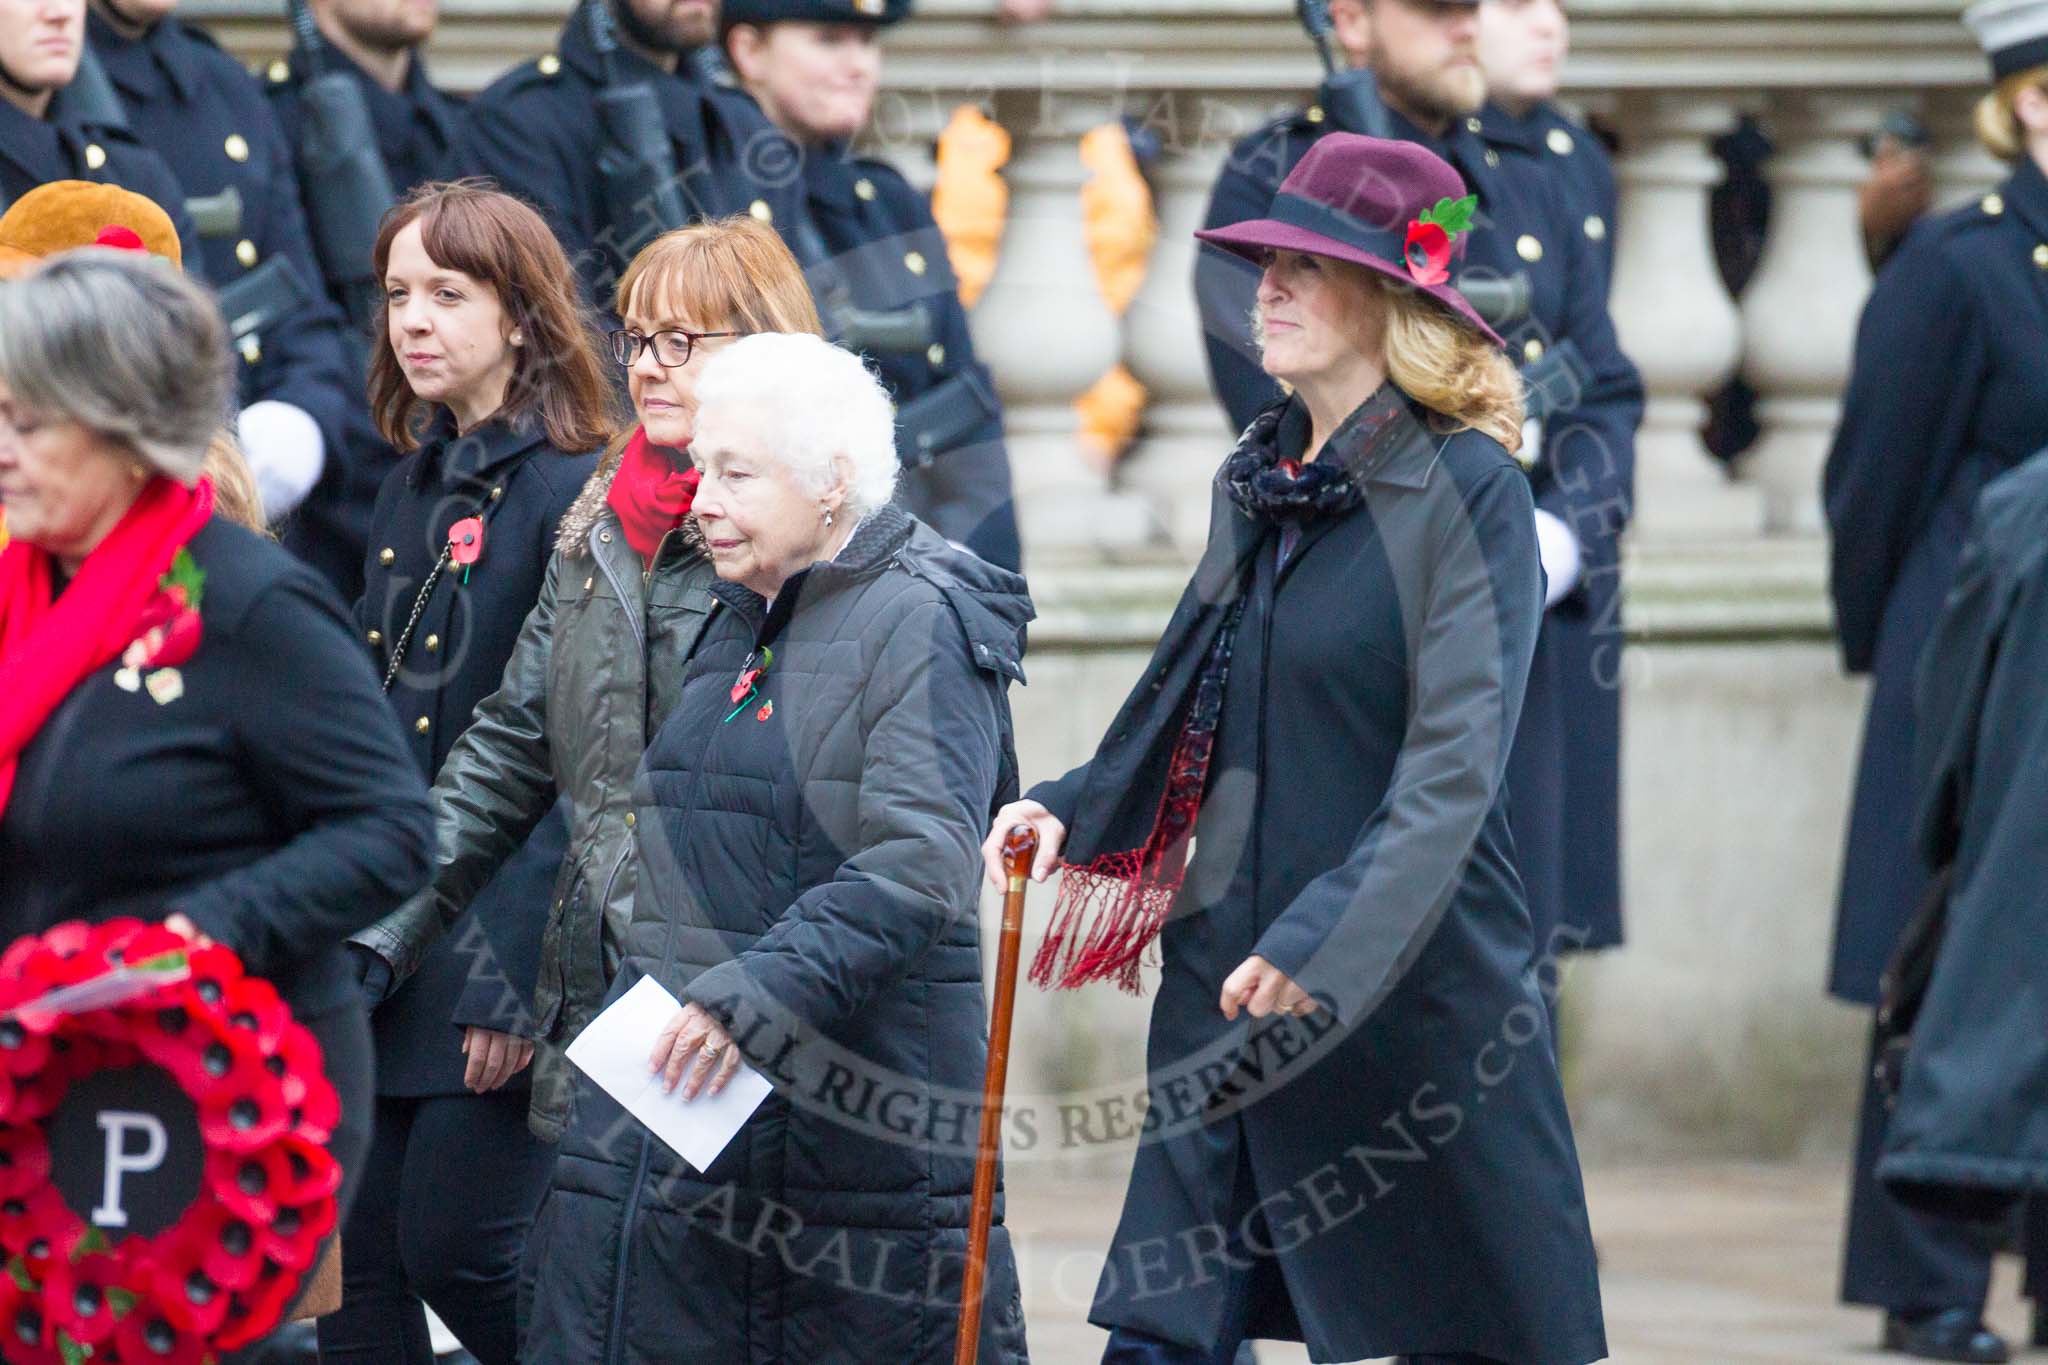 Remembrance Sunday at the Cenotaph 2015: Group B2, 43rd Reconnaissance Regiment Old Comrades Association.
Cenotaph, Whitehall, London SW1,
London,
Greater London,
United Kingdom,
on 08 November 2015 at 11:36, image #22